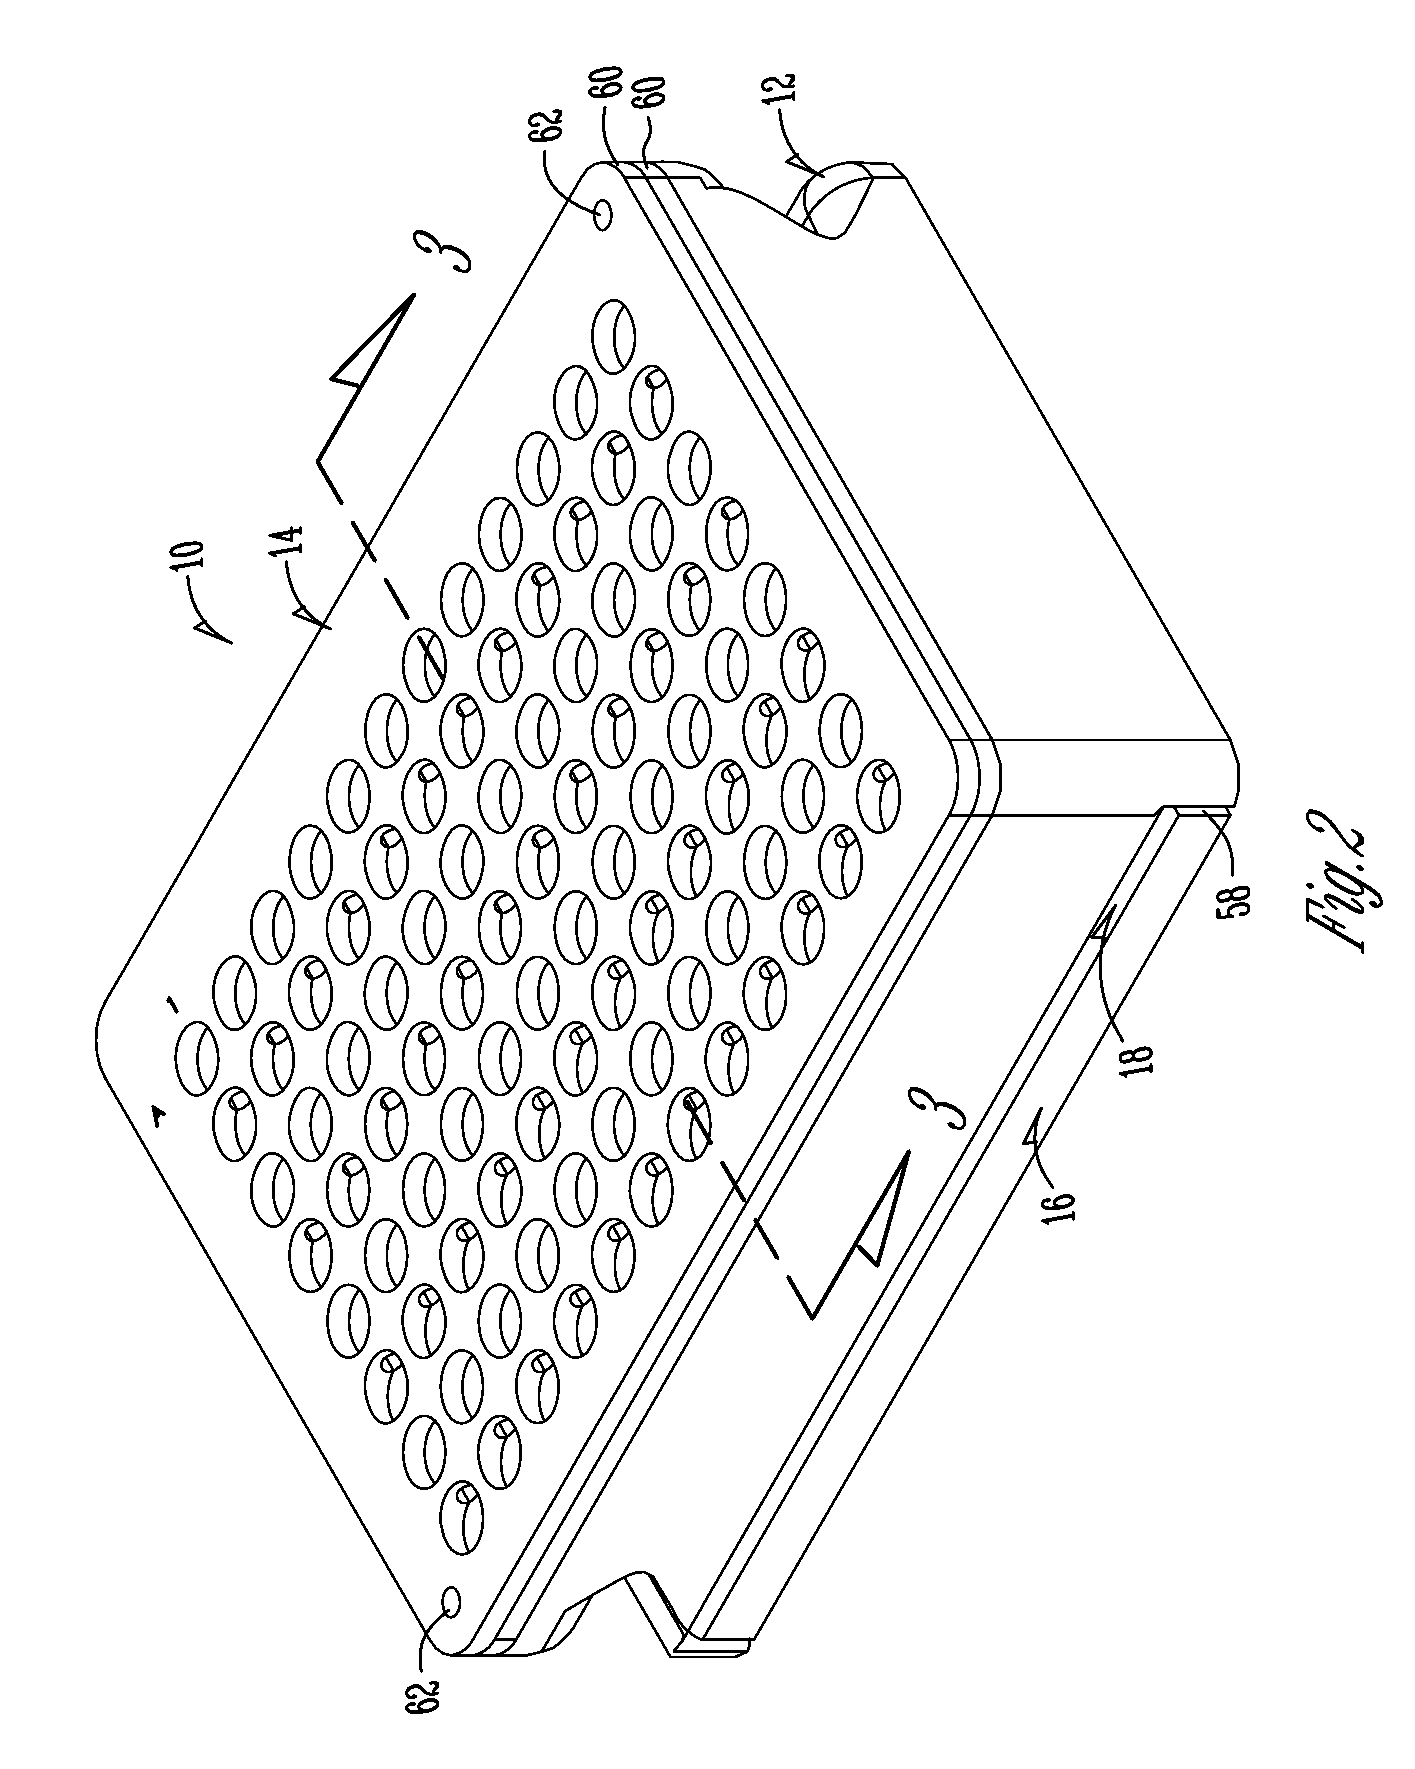 Apparatus, method and system for creating, handling, collecting and indexing seed and seed portions from plant seed